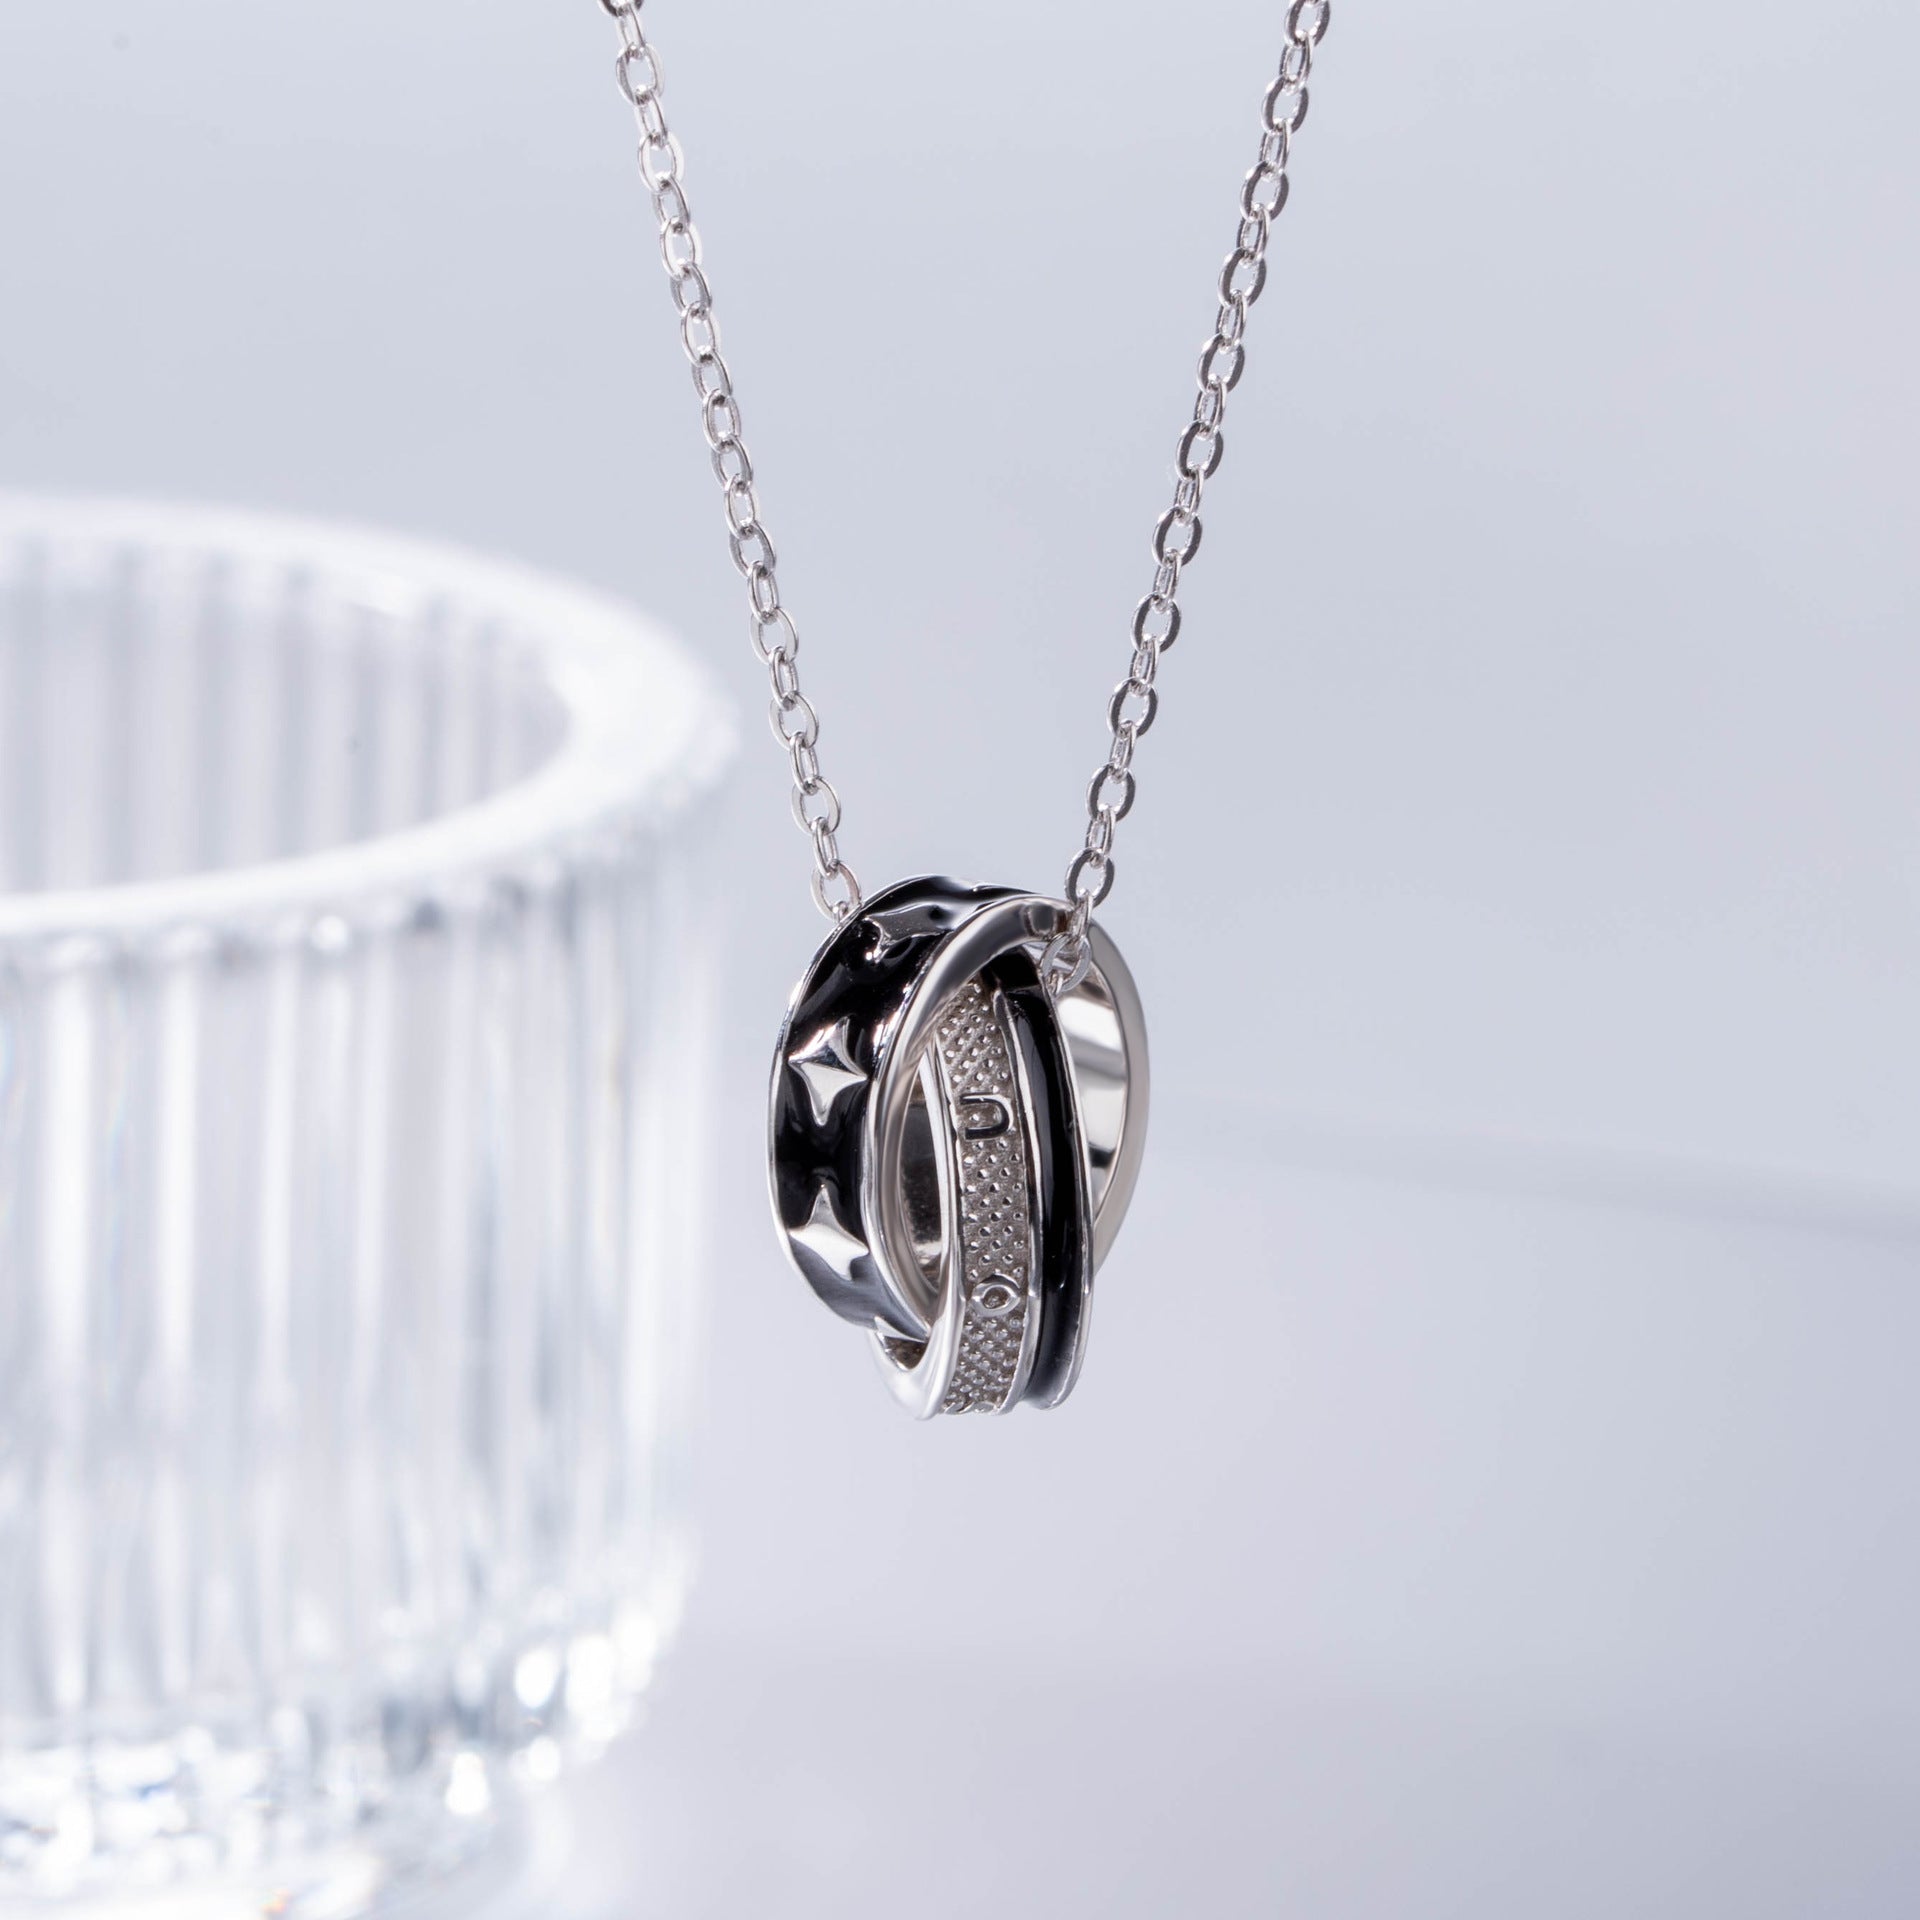 Wholesale Year of the tiger new eternal love lock key Necklace Sterling  Silver S925 basic clavicle chain From m.